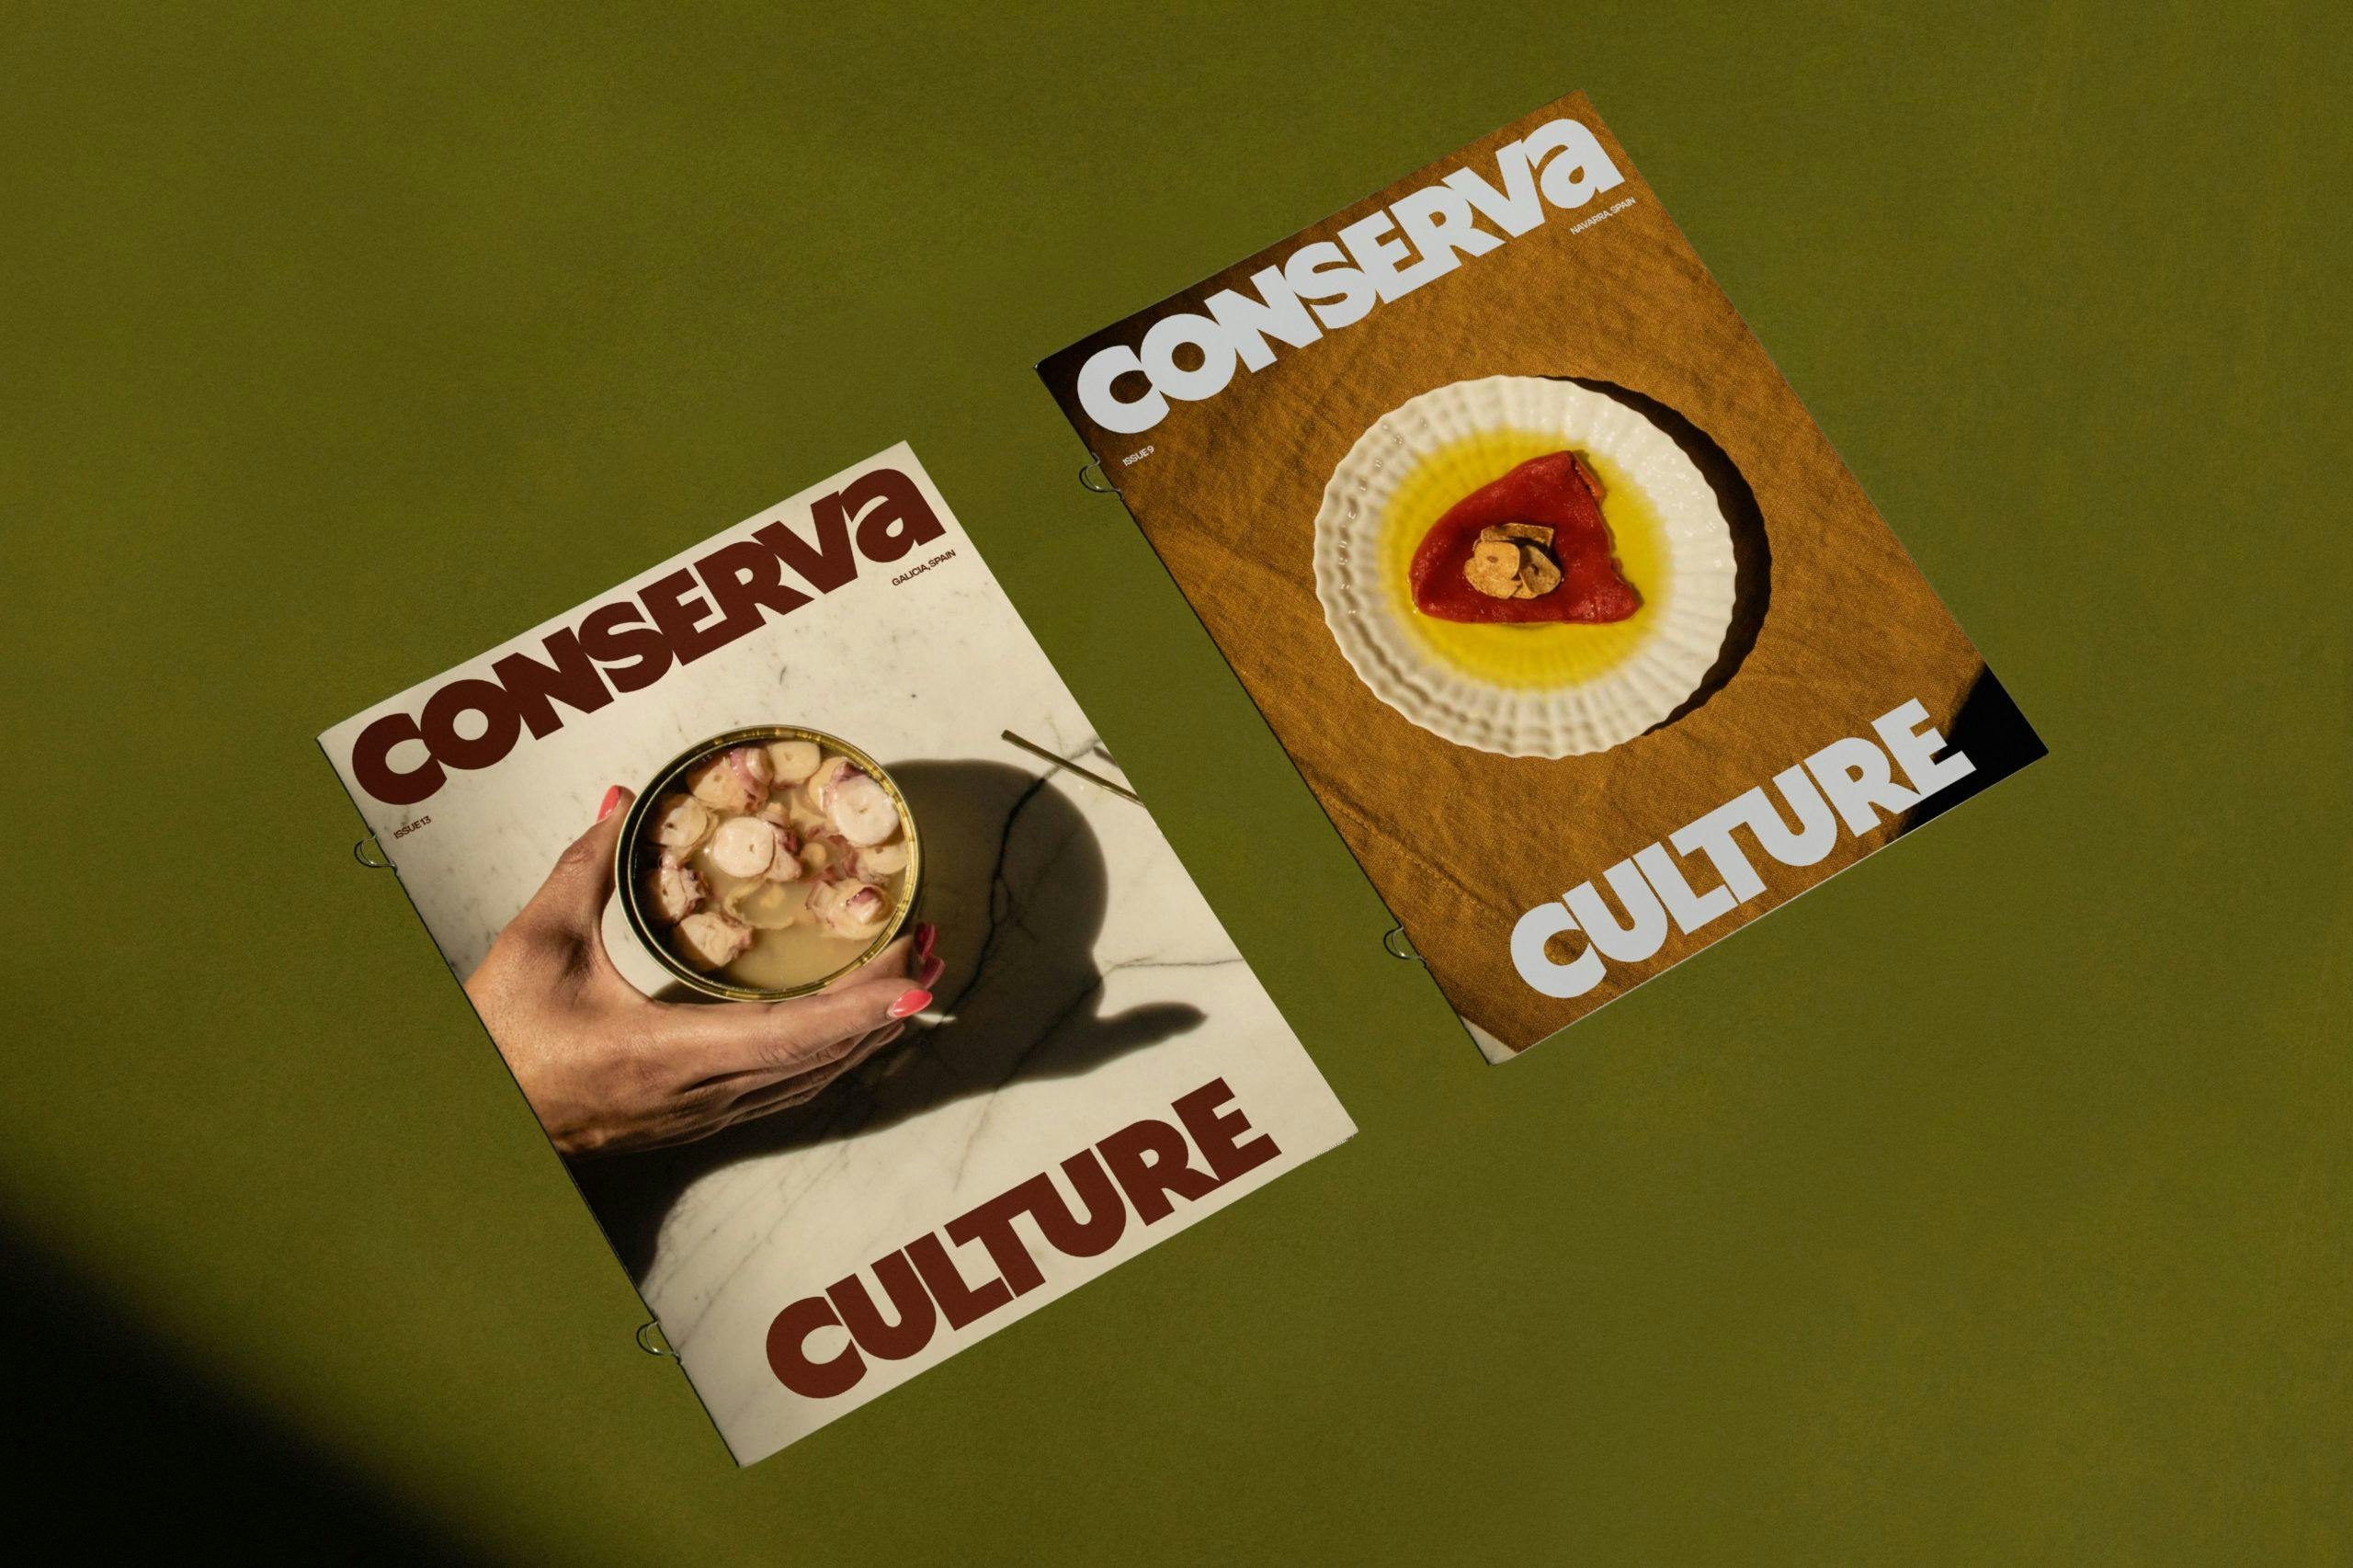 Conserva recipe guides sitting on a green table